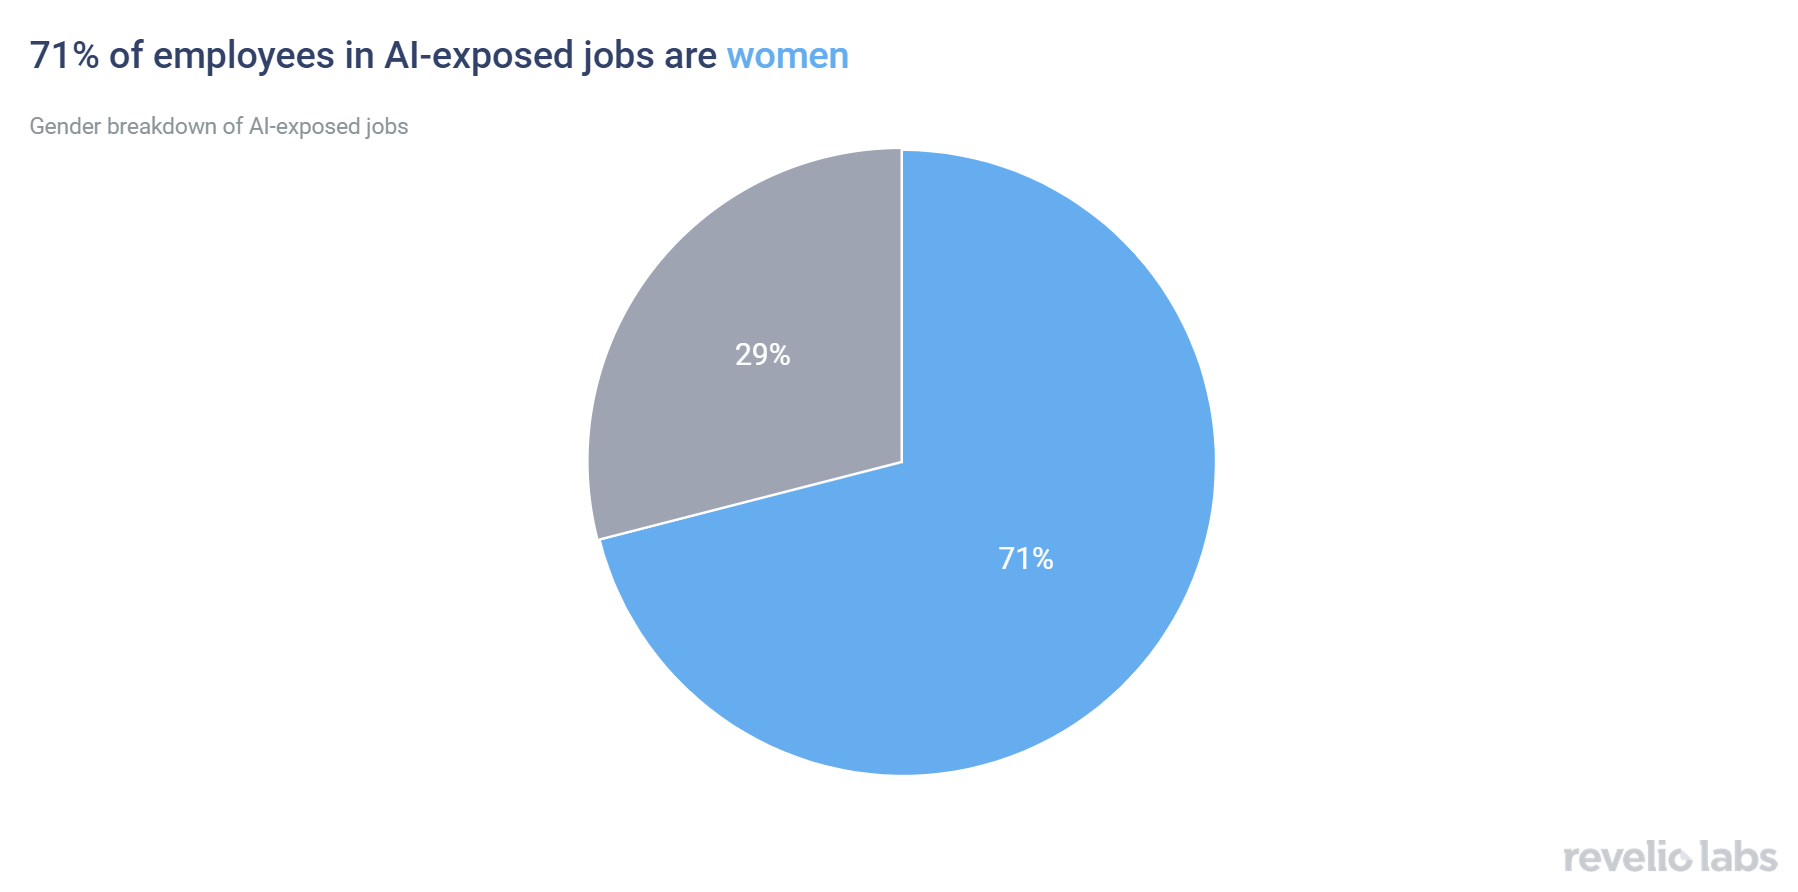 71% of employees in AI-exposed jobs are women